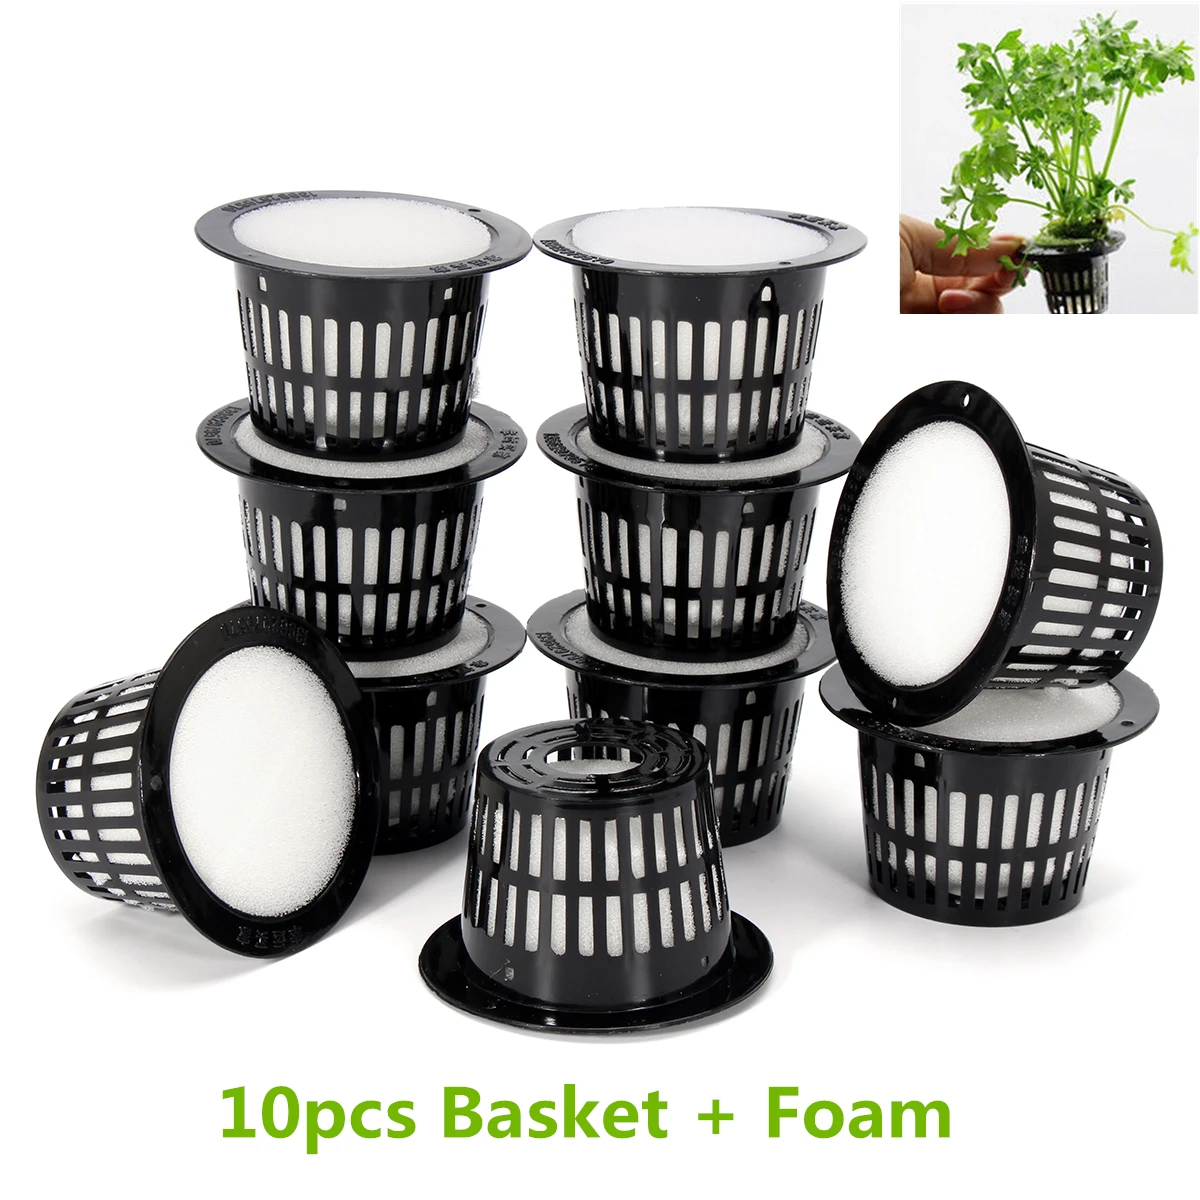 10pcs Mixed Shaped Size White Foam for Green Plants Hydroponic Planting Basket 